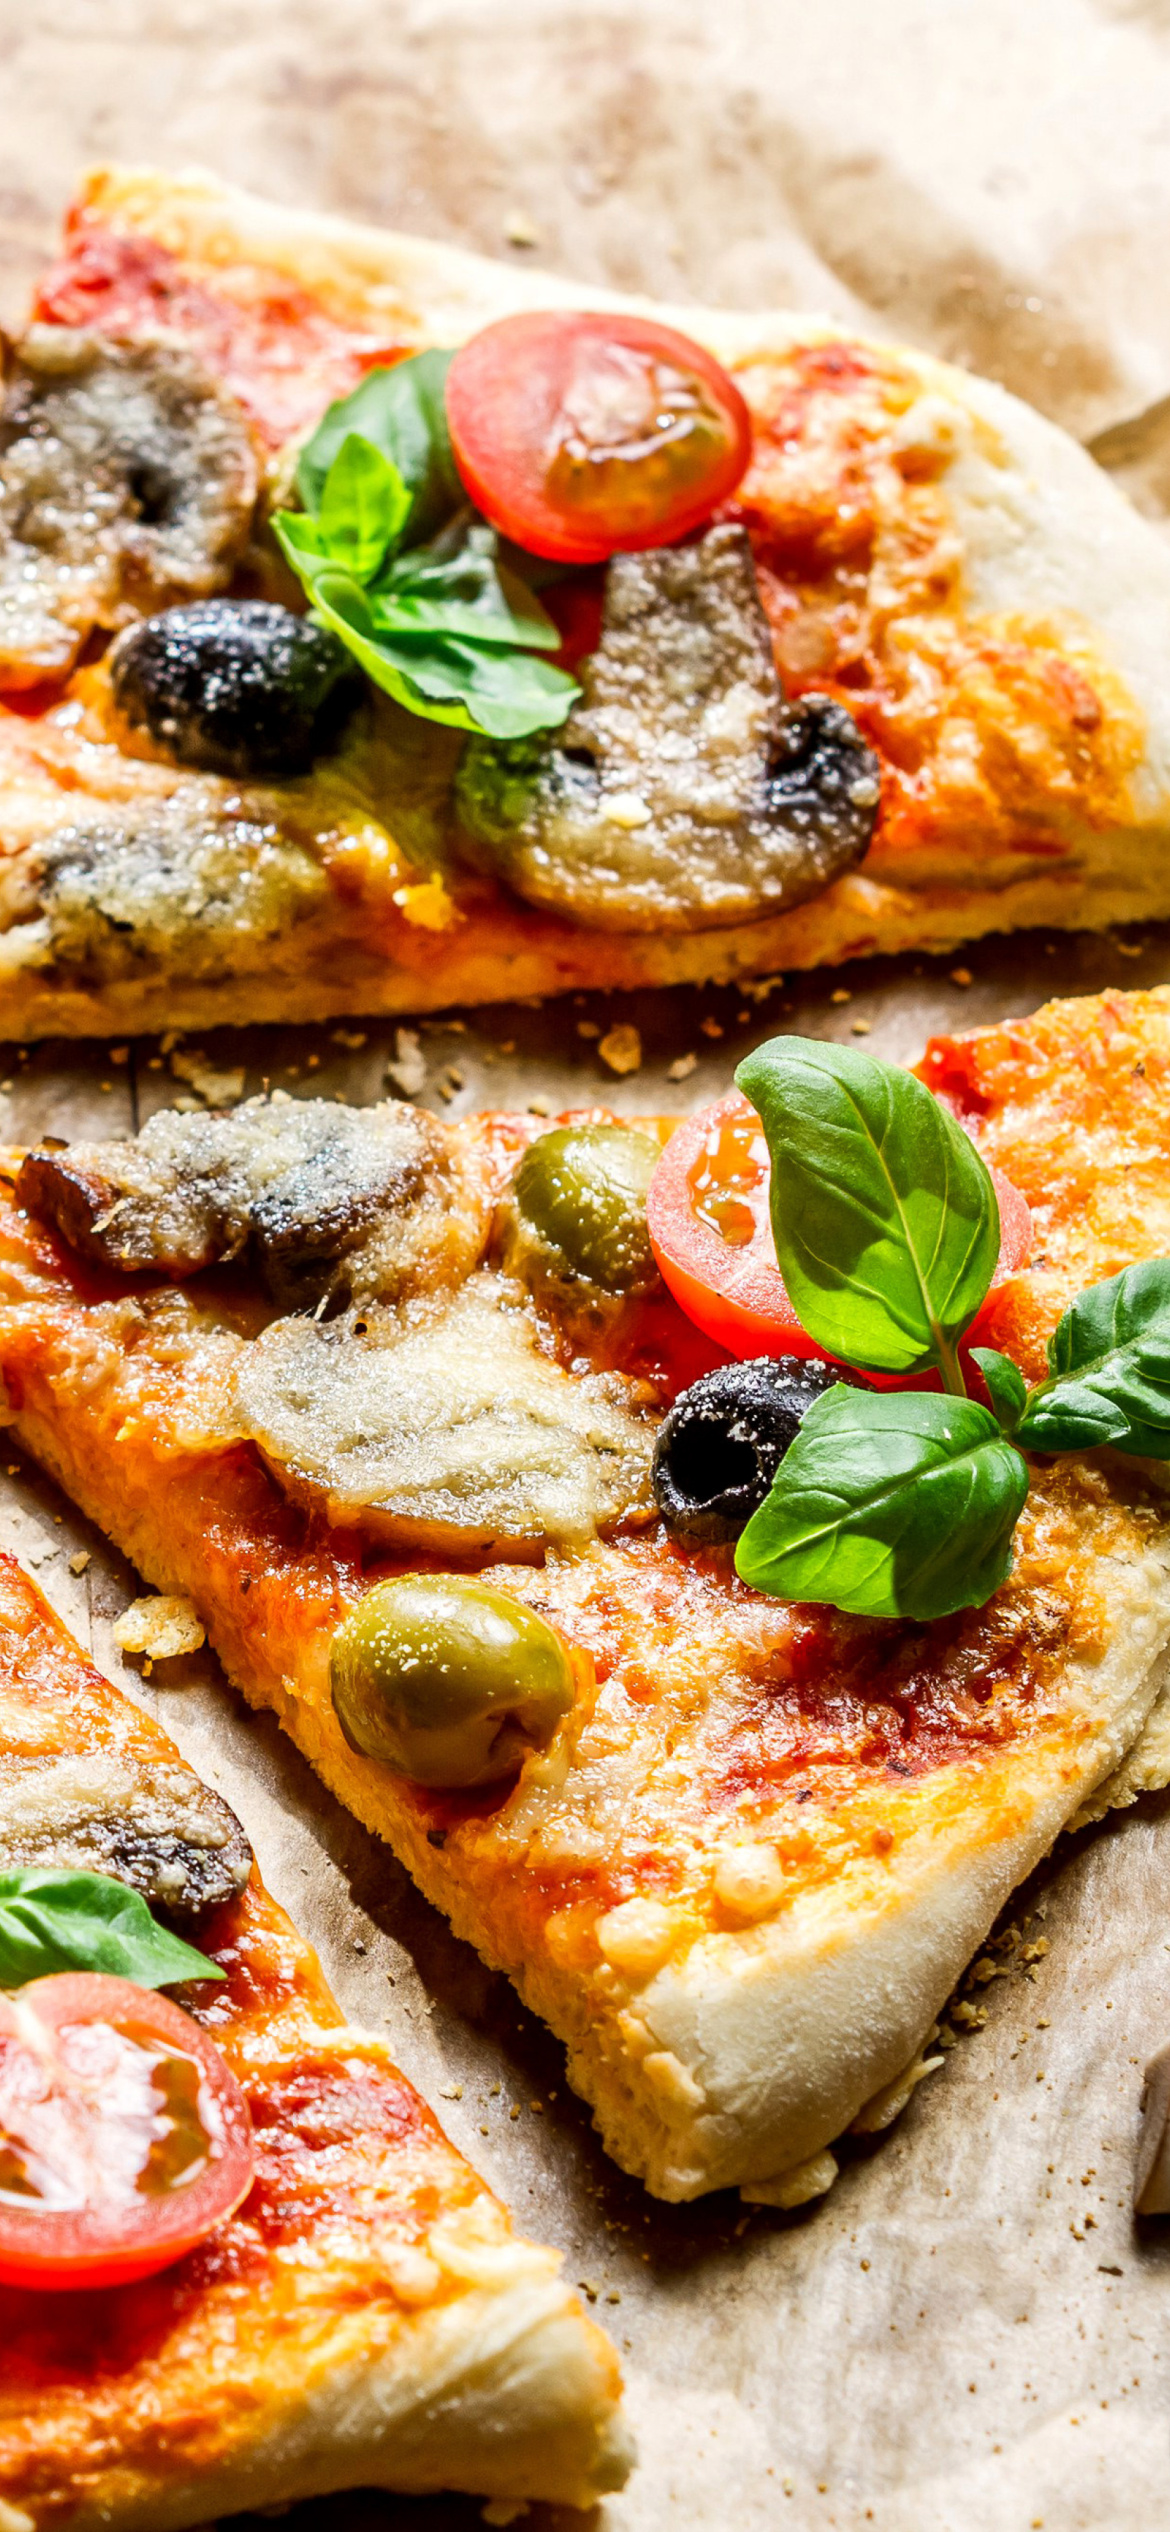 Das Pizza with olives Wallpaper 1170x2532